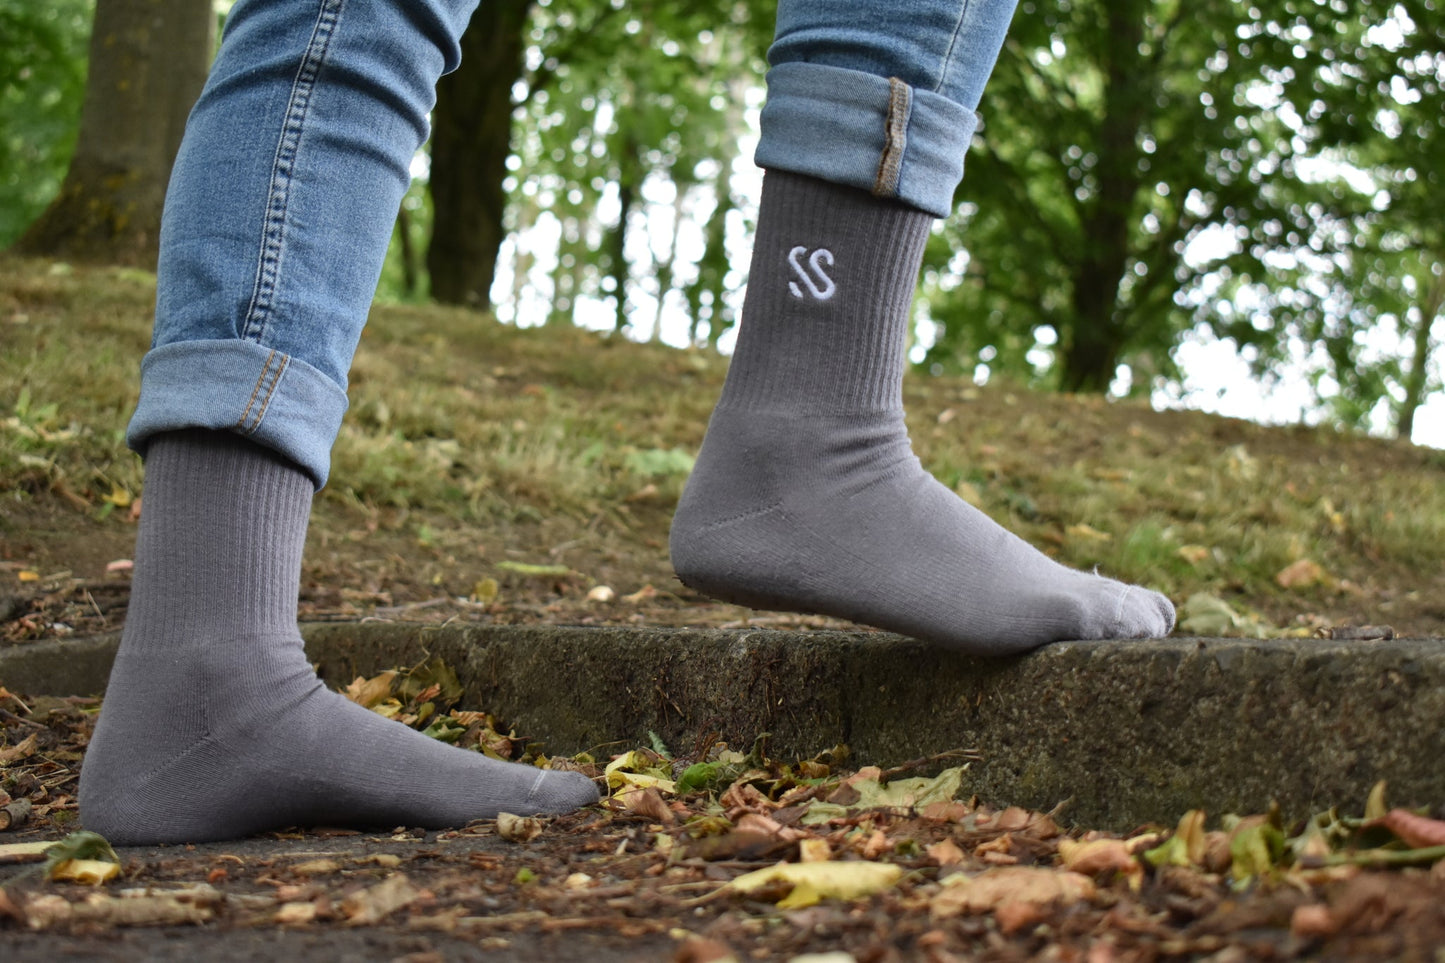 A pair of combed cotton grey socks being worn outside